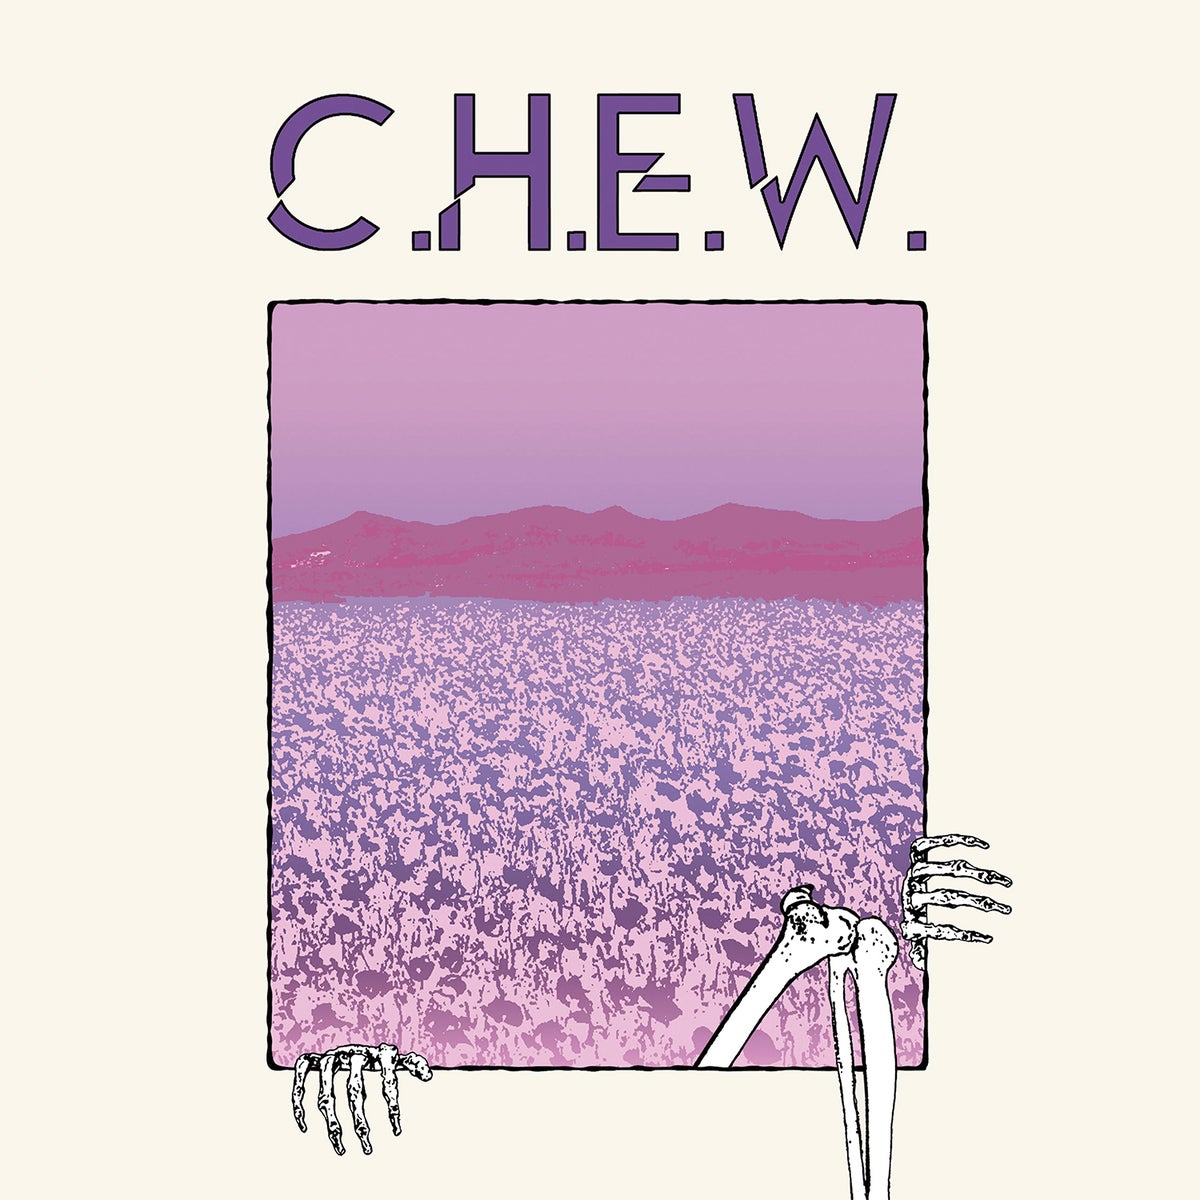 C.H.E.W. - IN DUE TIME 7"